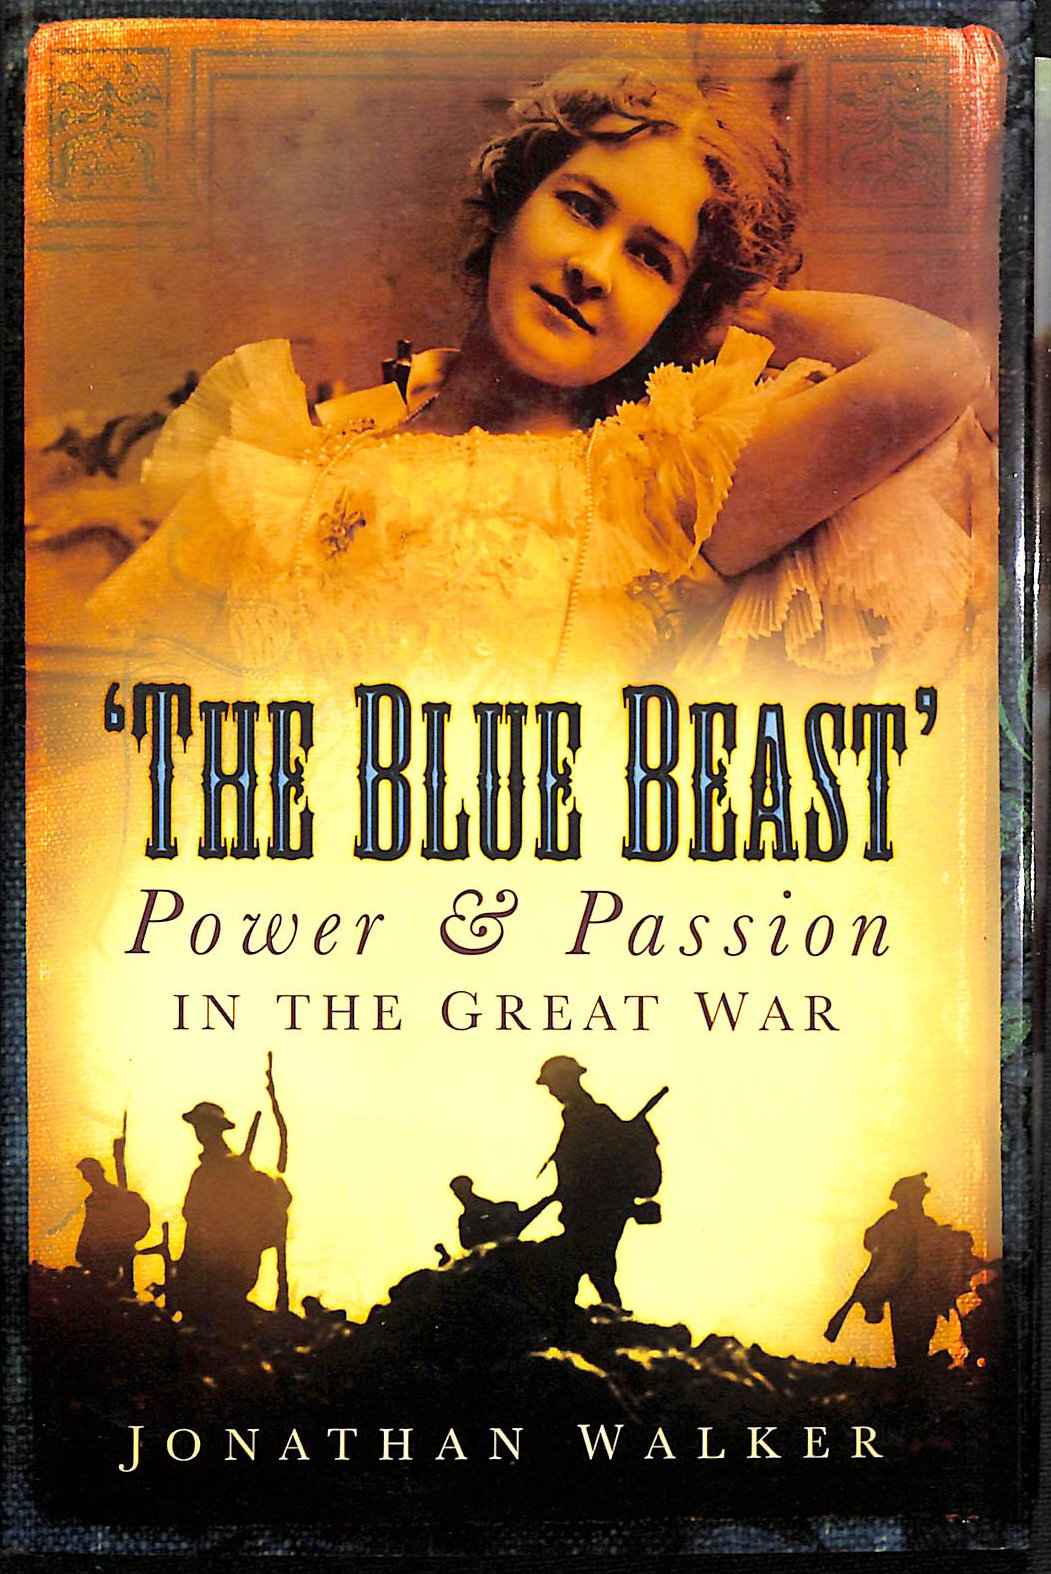 JONATHAN WALKER - The Blue Beast: Power and Passion in the Great War